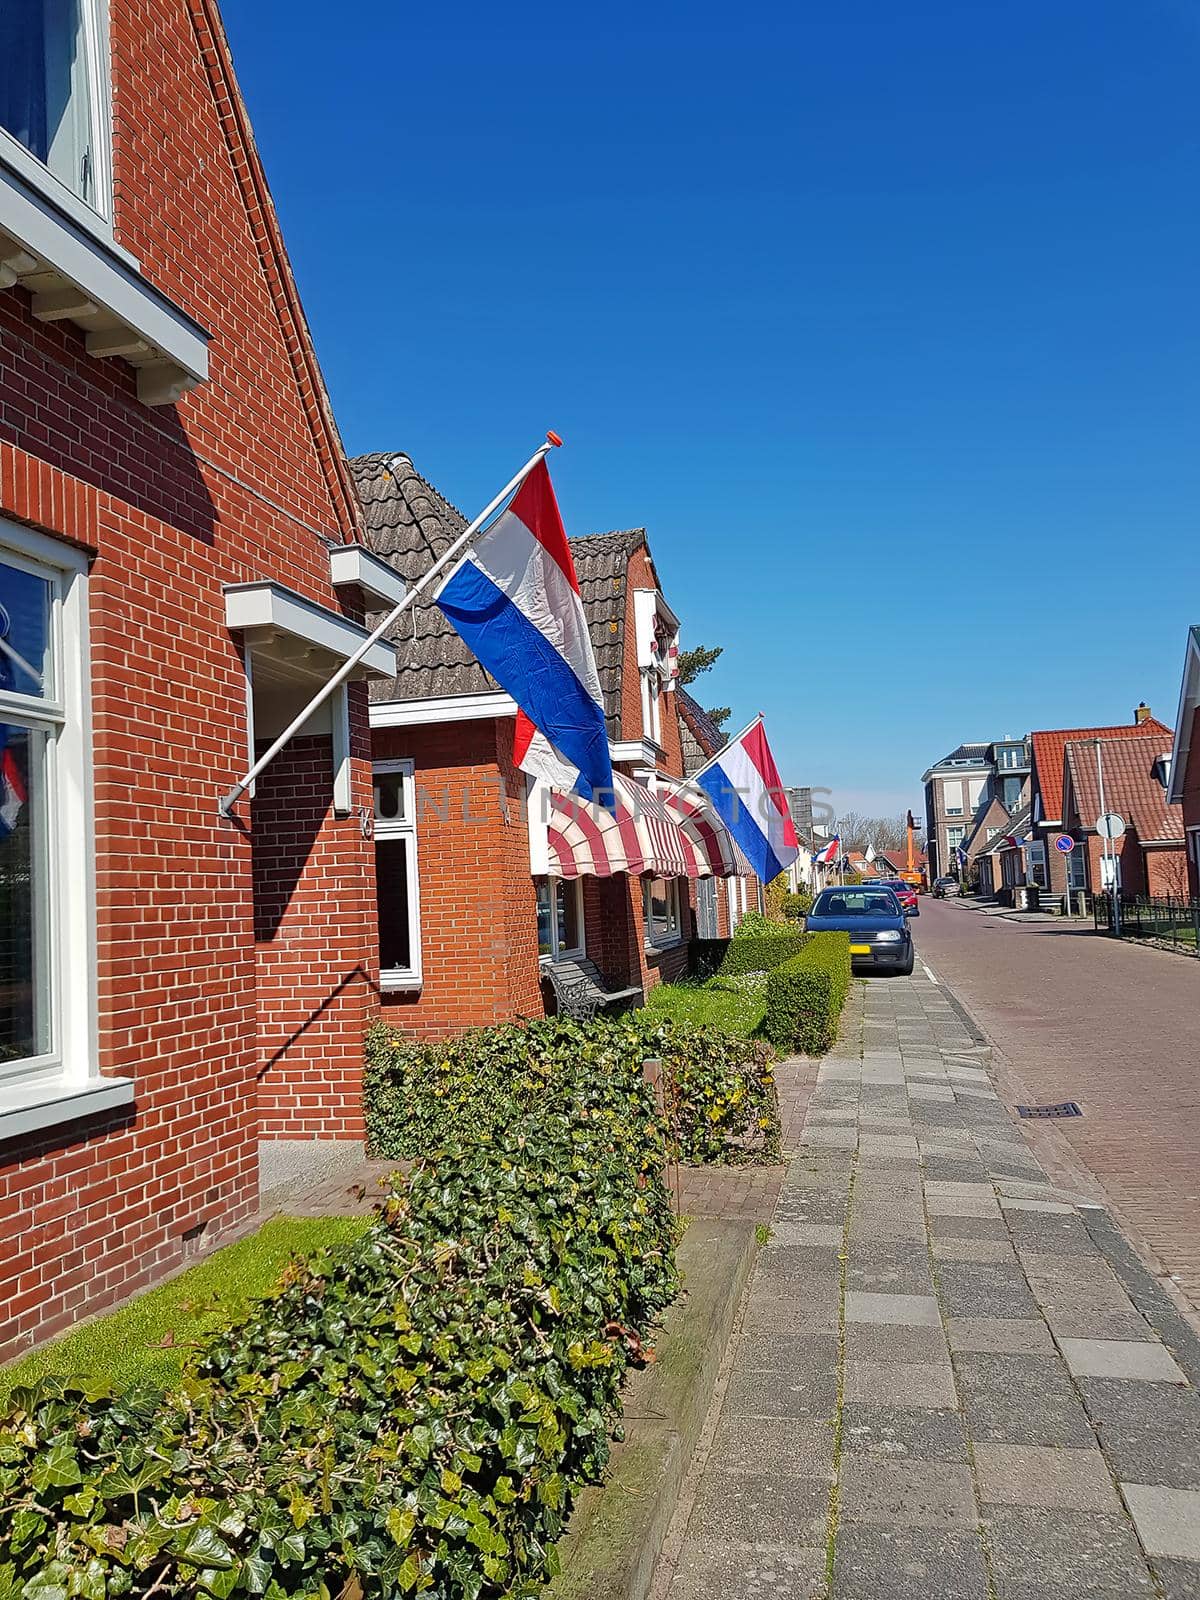 Kingsday in a little village in the Netherlands